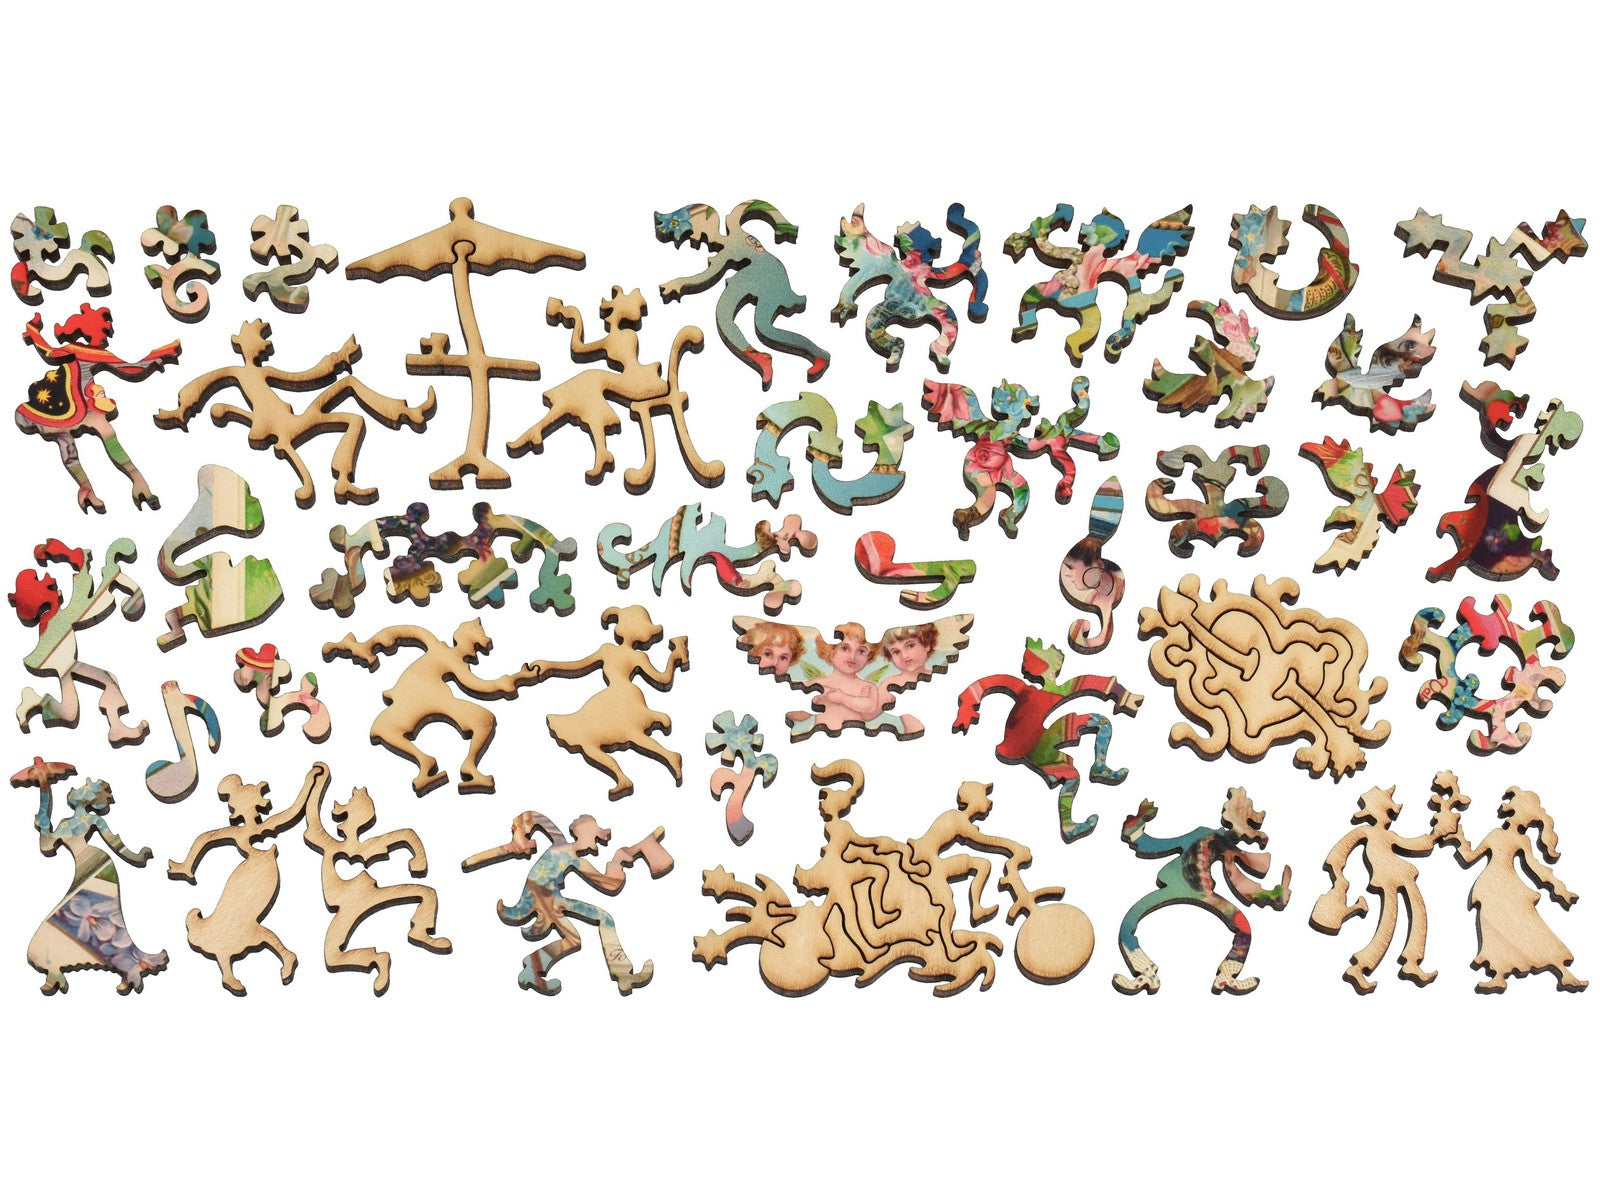 The whimsies that can be found in the puzzle, Valentine Collection Special Edition.